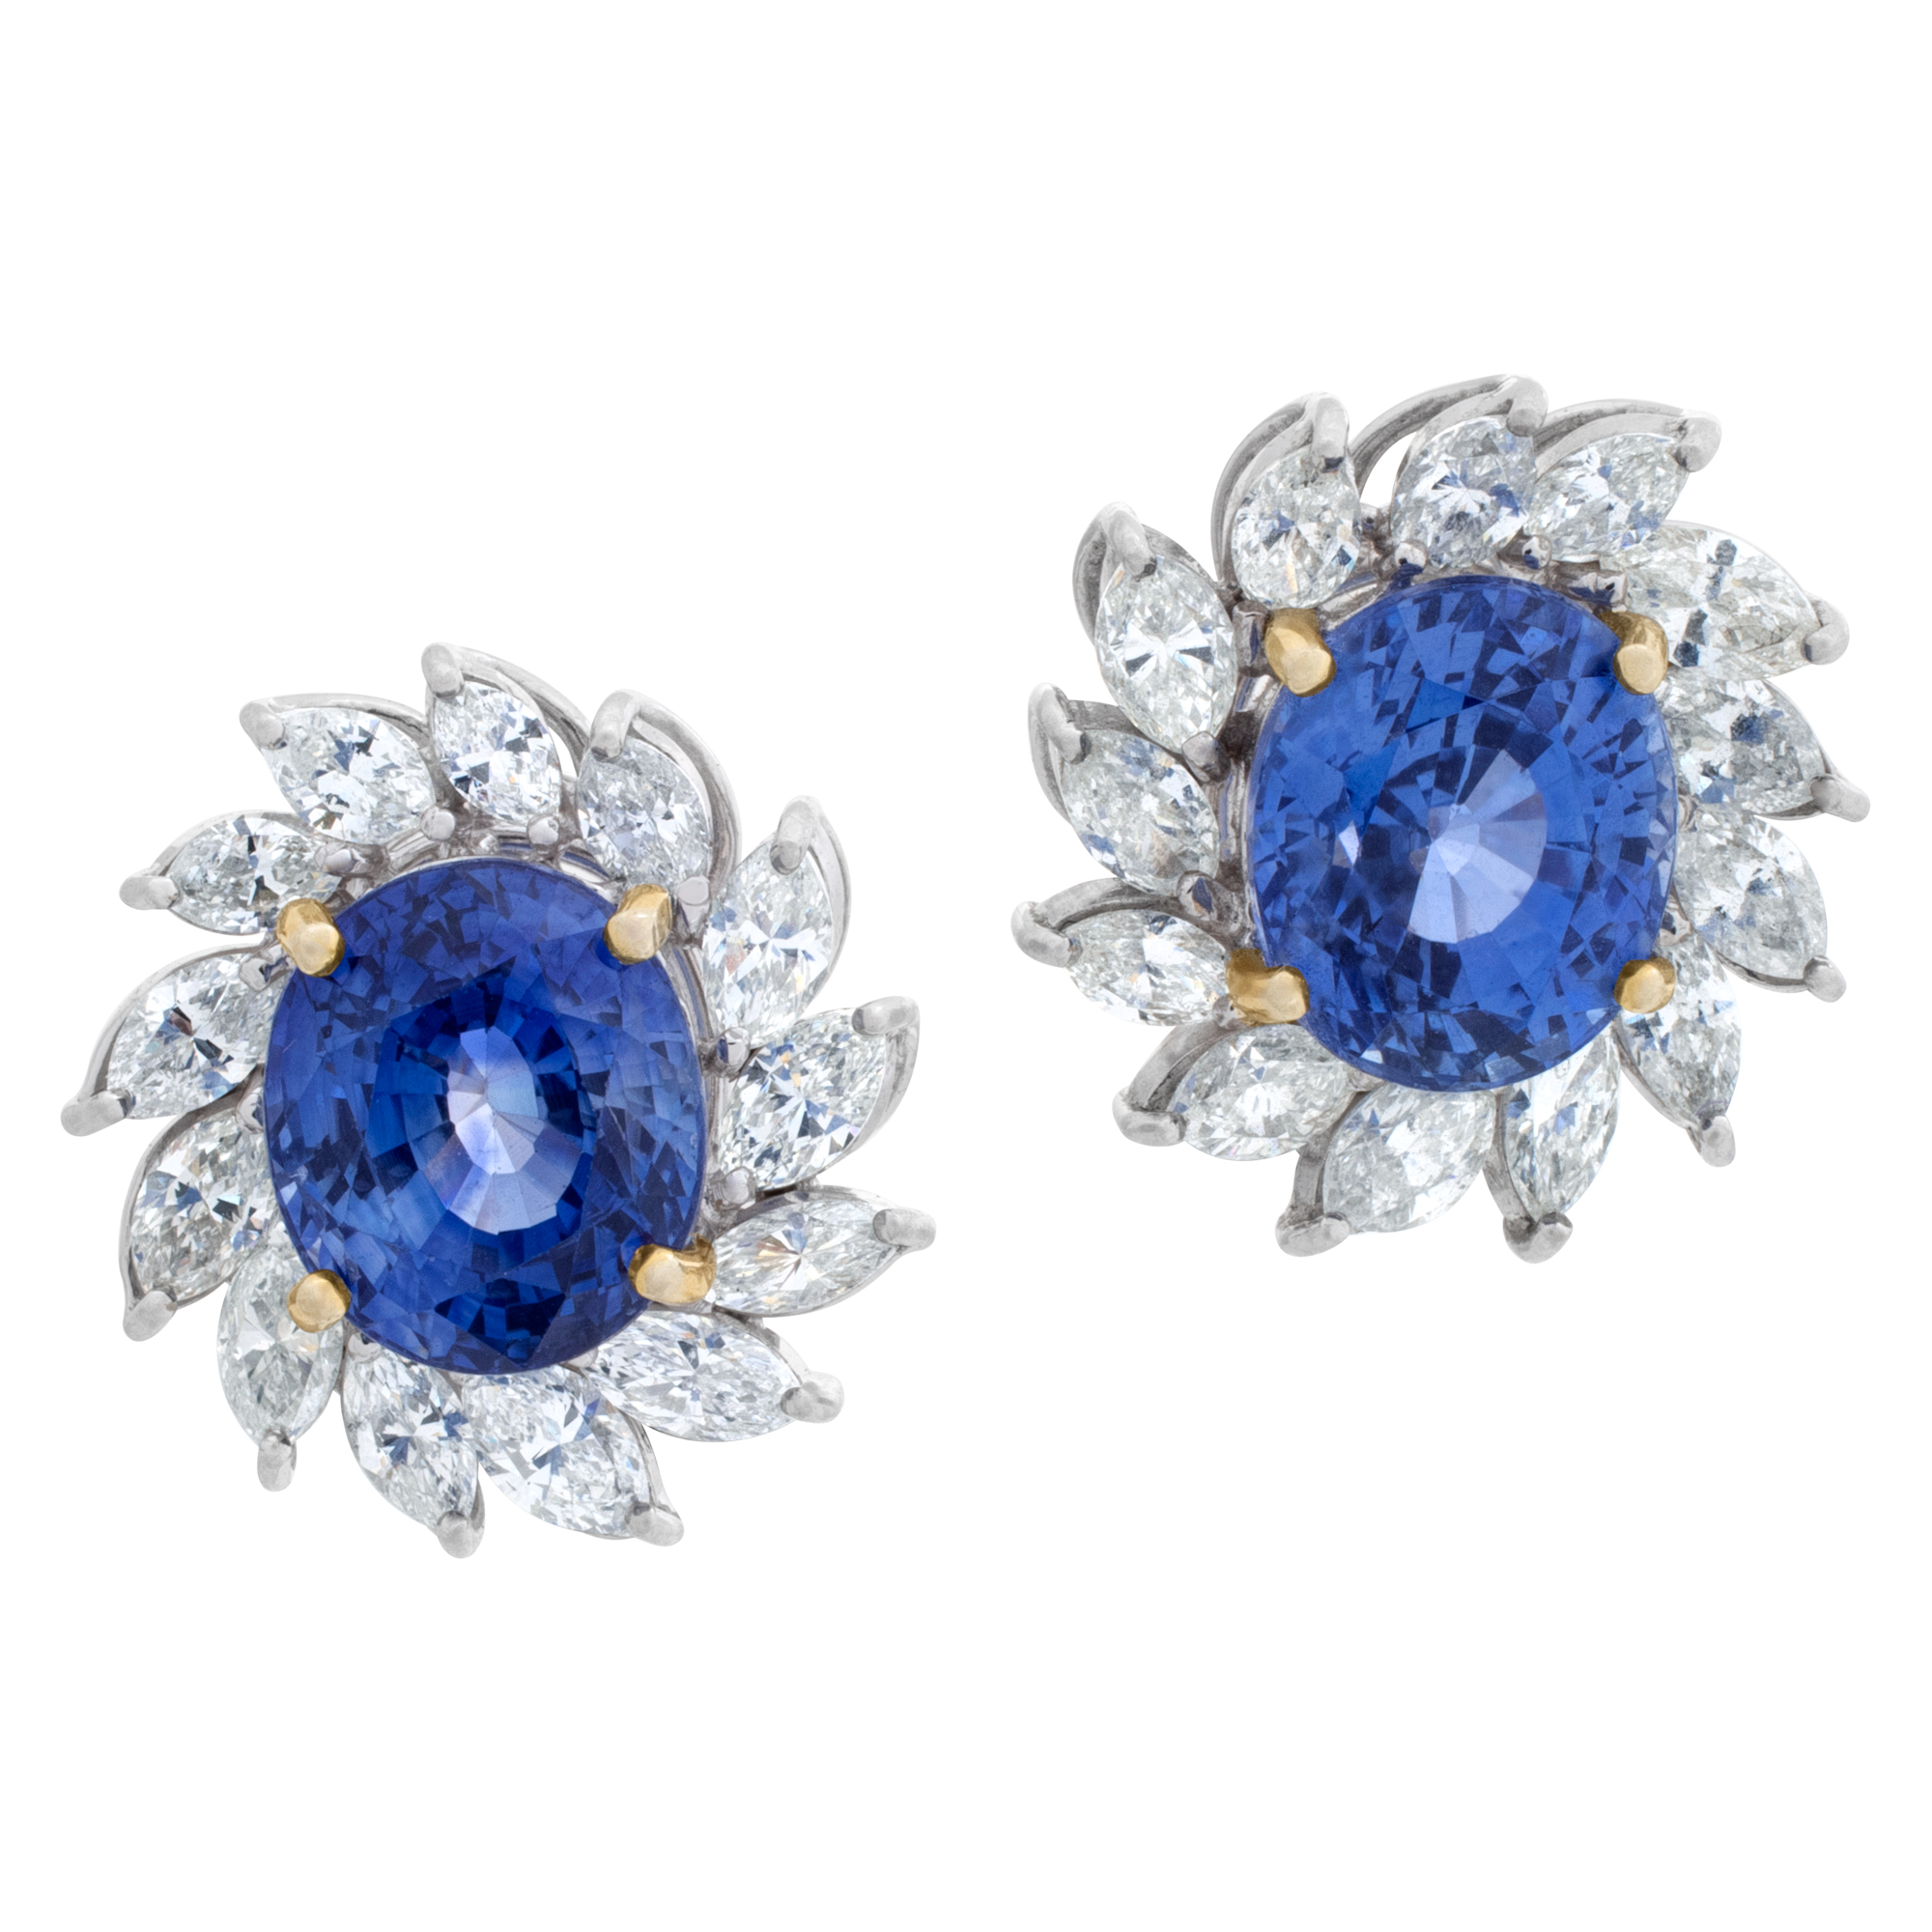 Blue sapphire and diamond earrings in 18k white gold image 1